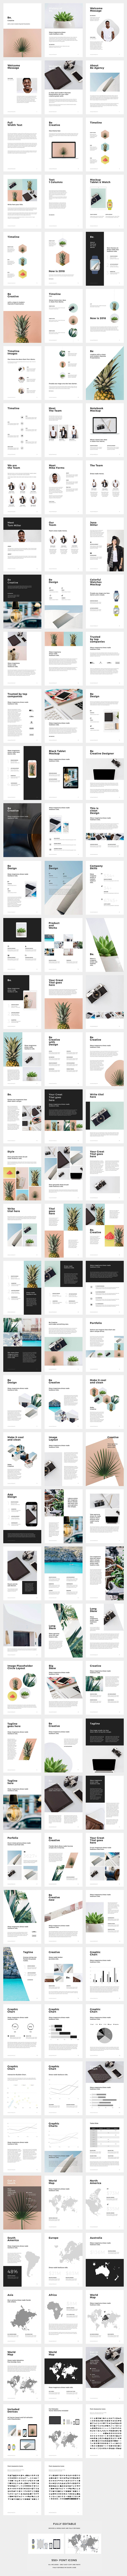 Cool huge template with modern and colorful design.